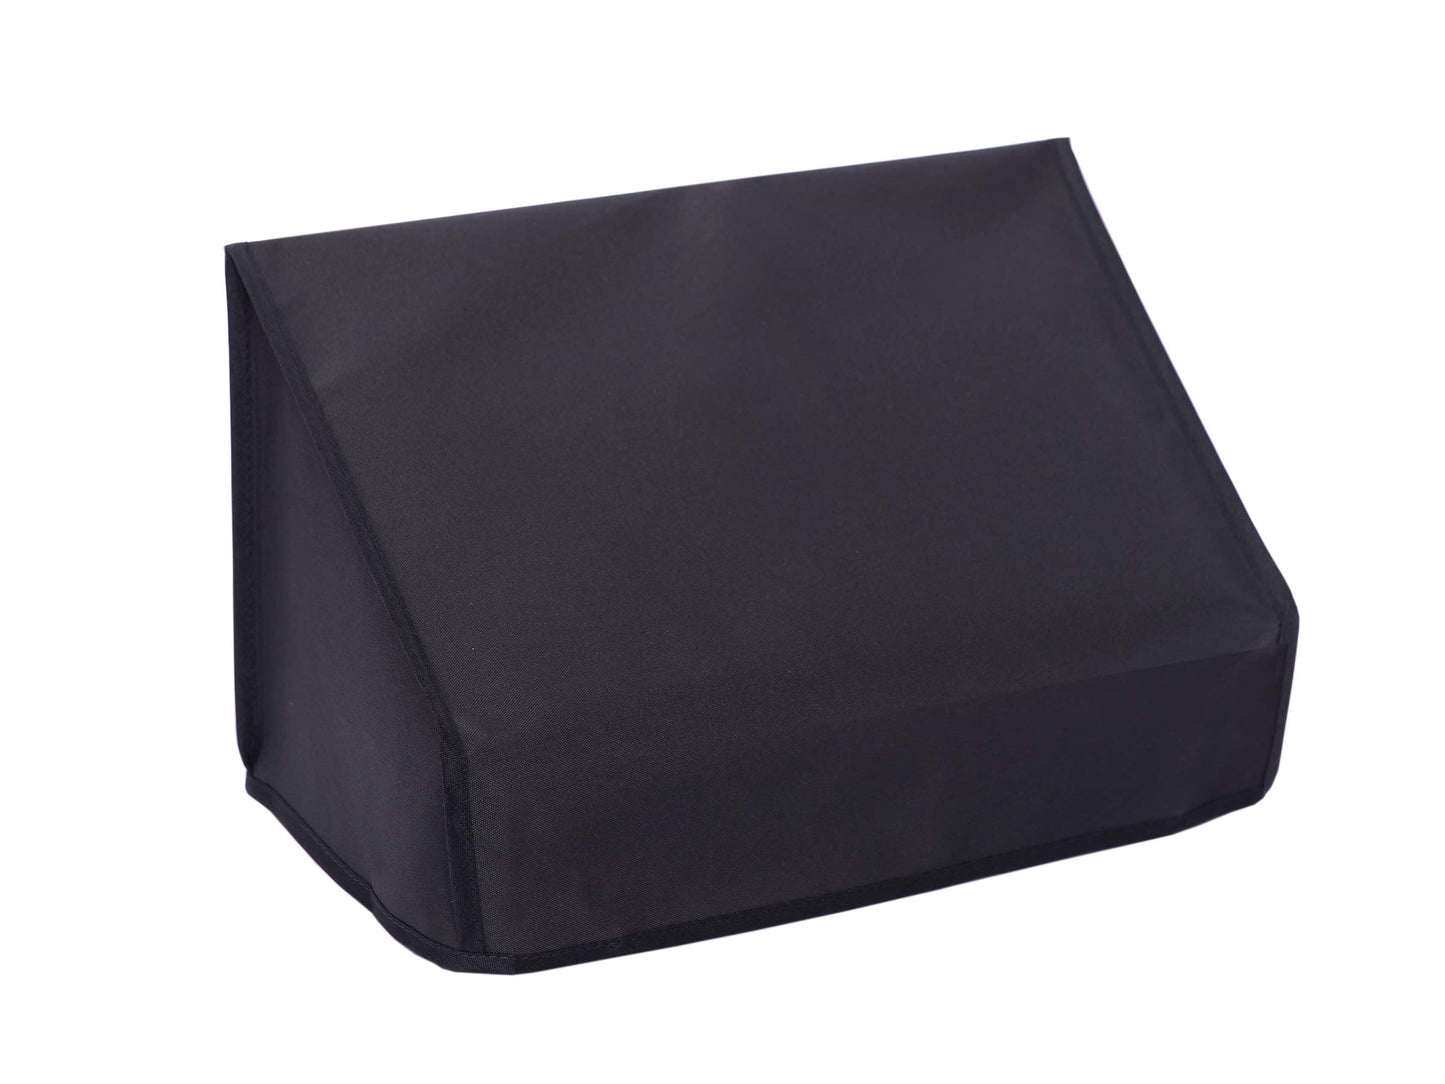 The Perfect Dust Cover, Black Nylon Cover for Epson FastFoto FF-680W, Workforce ES-400 and Workforce ES-500W Scanners, Anti Static Double Stitched Cover by The Perfect Dust Cover LLC